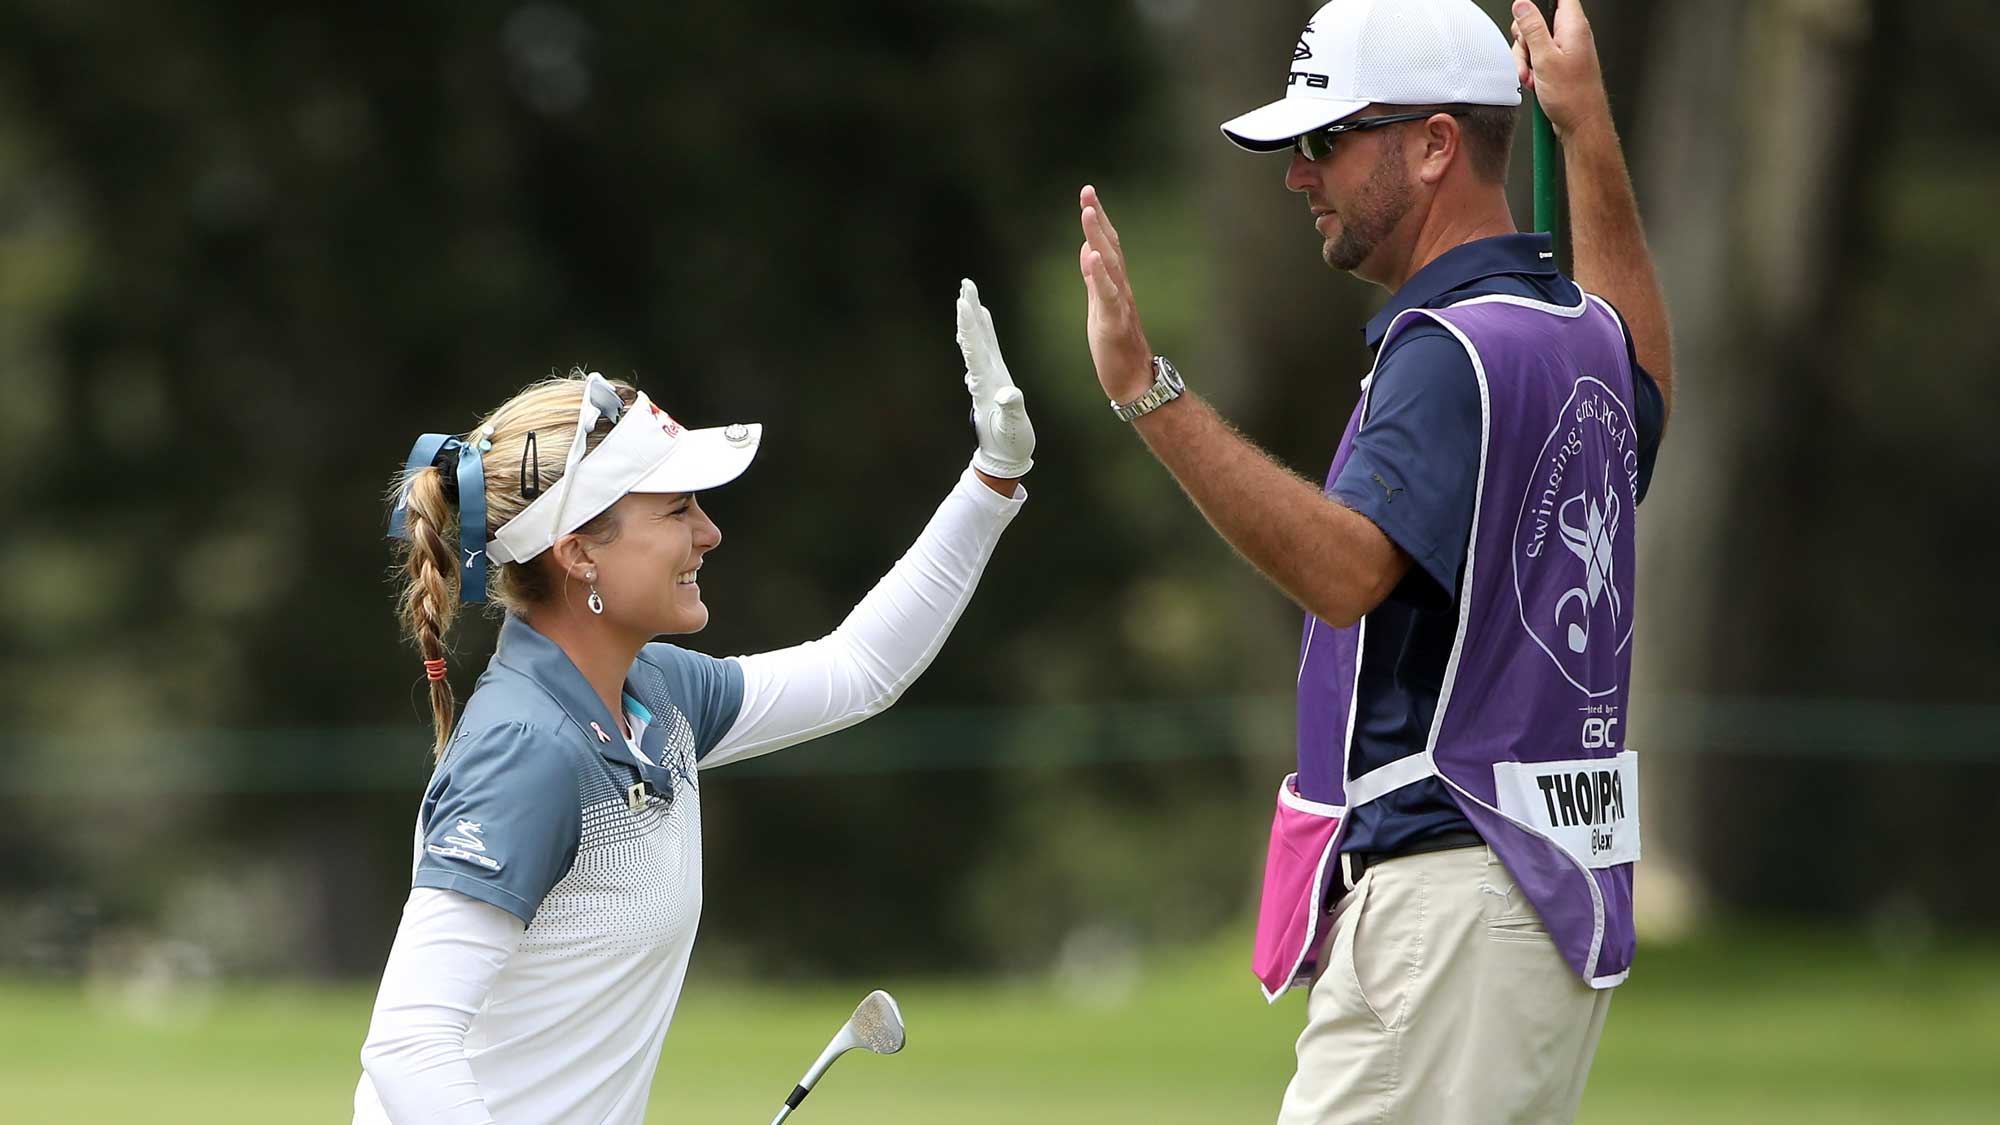 Lexi Thompson high-fives her caddie, Benji Thompson, after she chipped in for eagle on the sixth hole during round one of the Swinging Skirts LPGA Classic